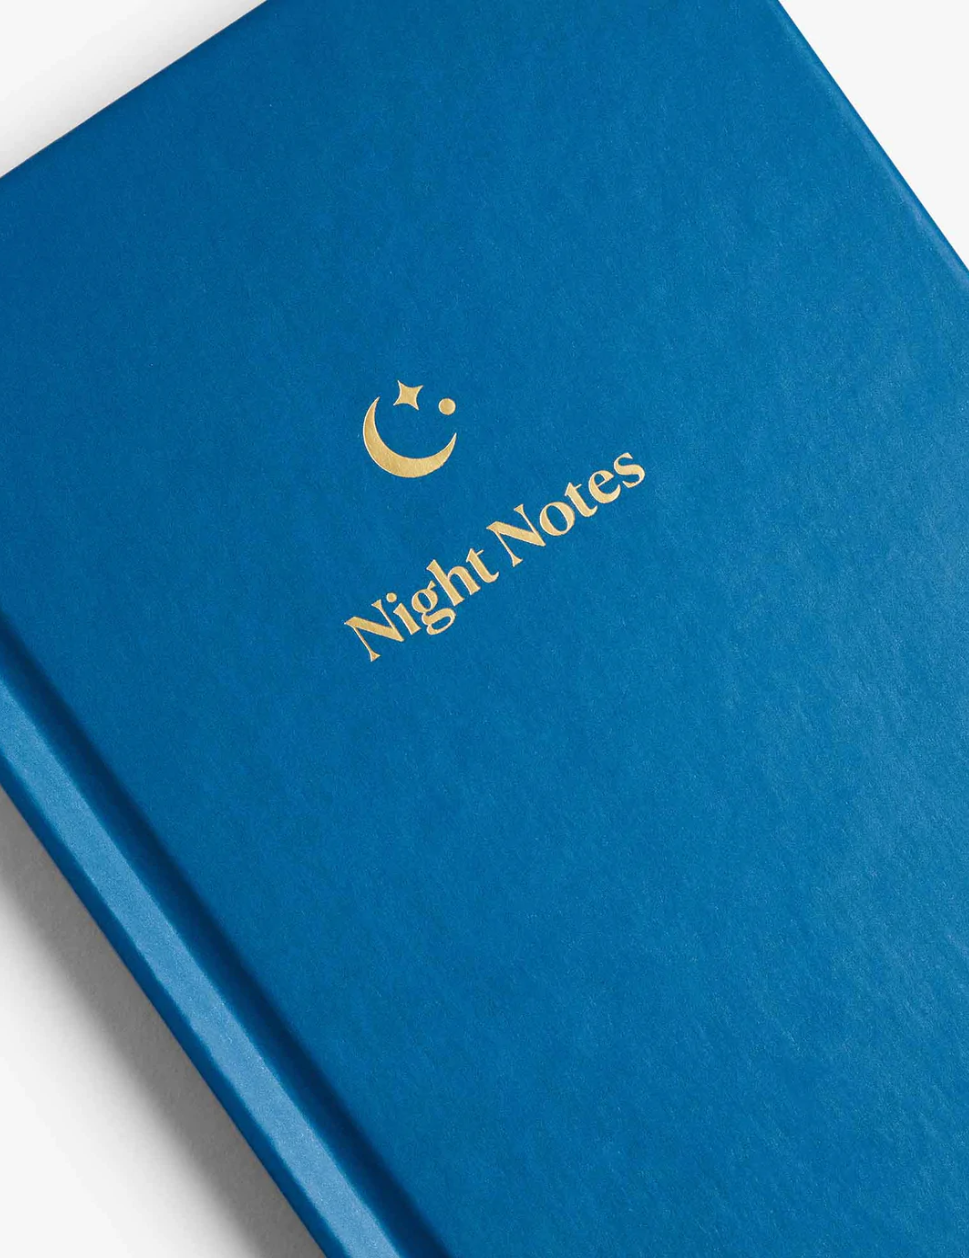 Night Notes Journal